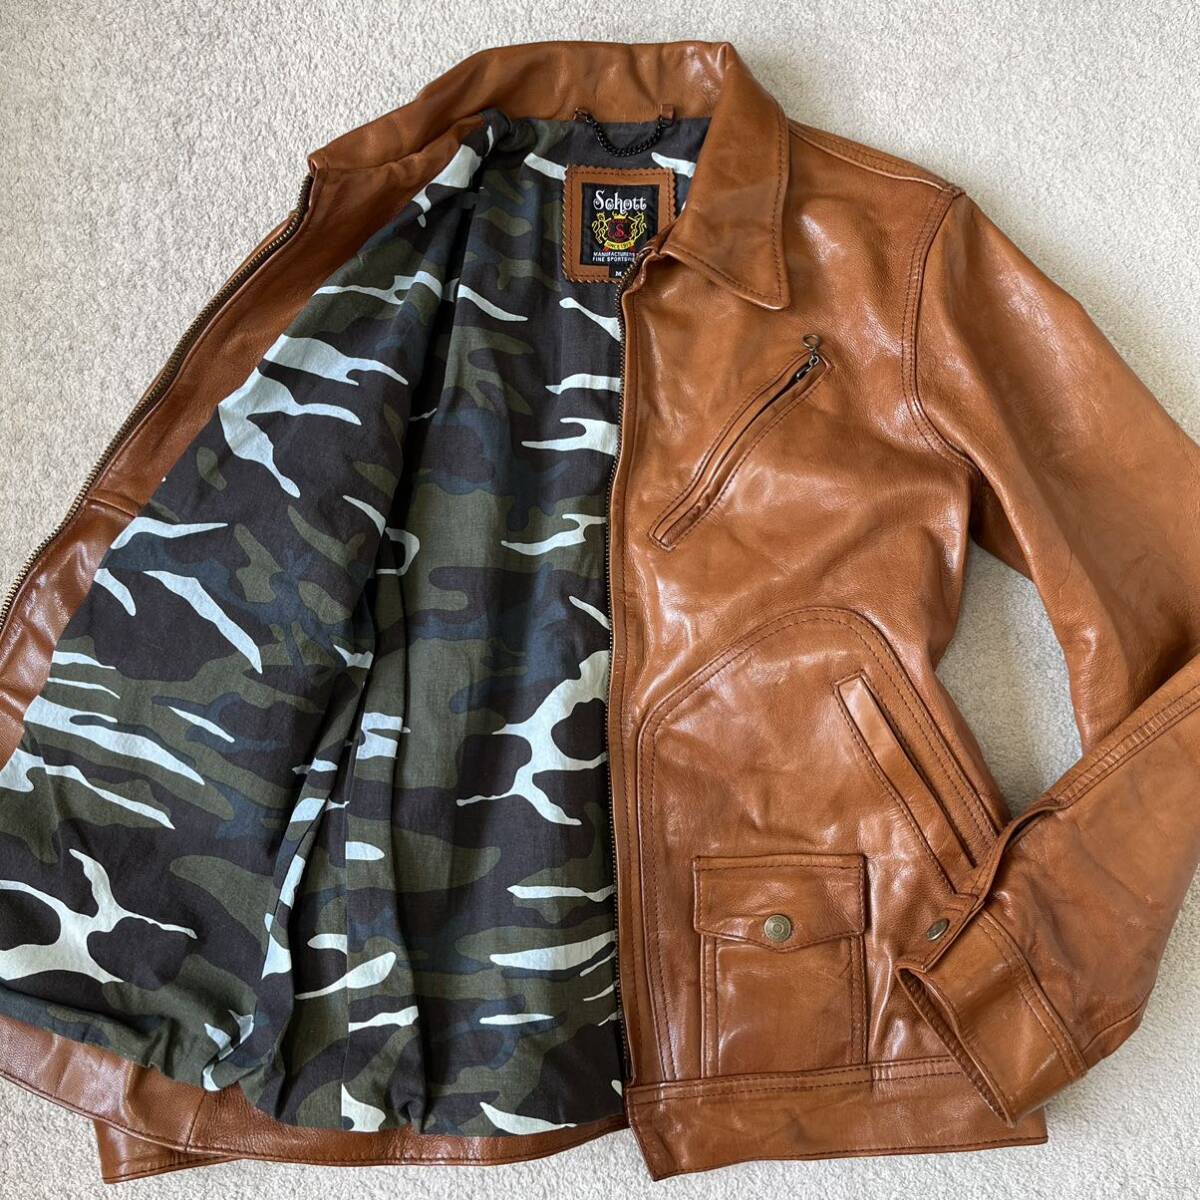  beautiful goods * Schott Schott leather jacket Rider's single camouflage camouflage single collar attaching original leather Brown outer leather jacket 3161042